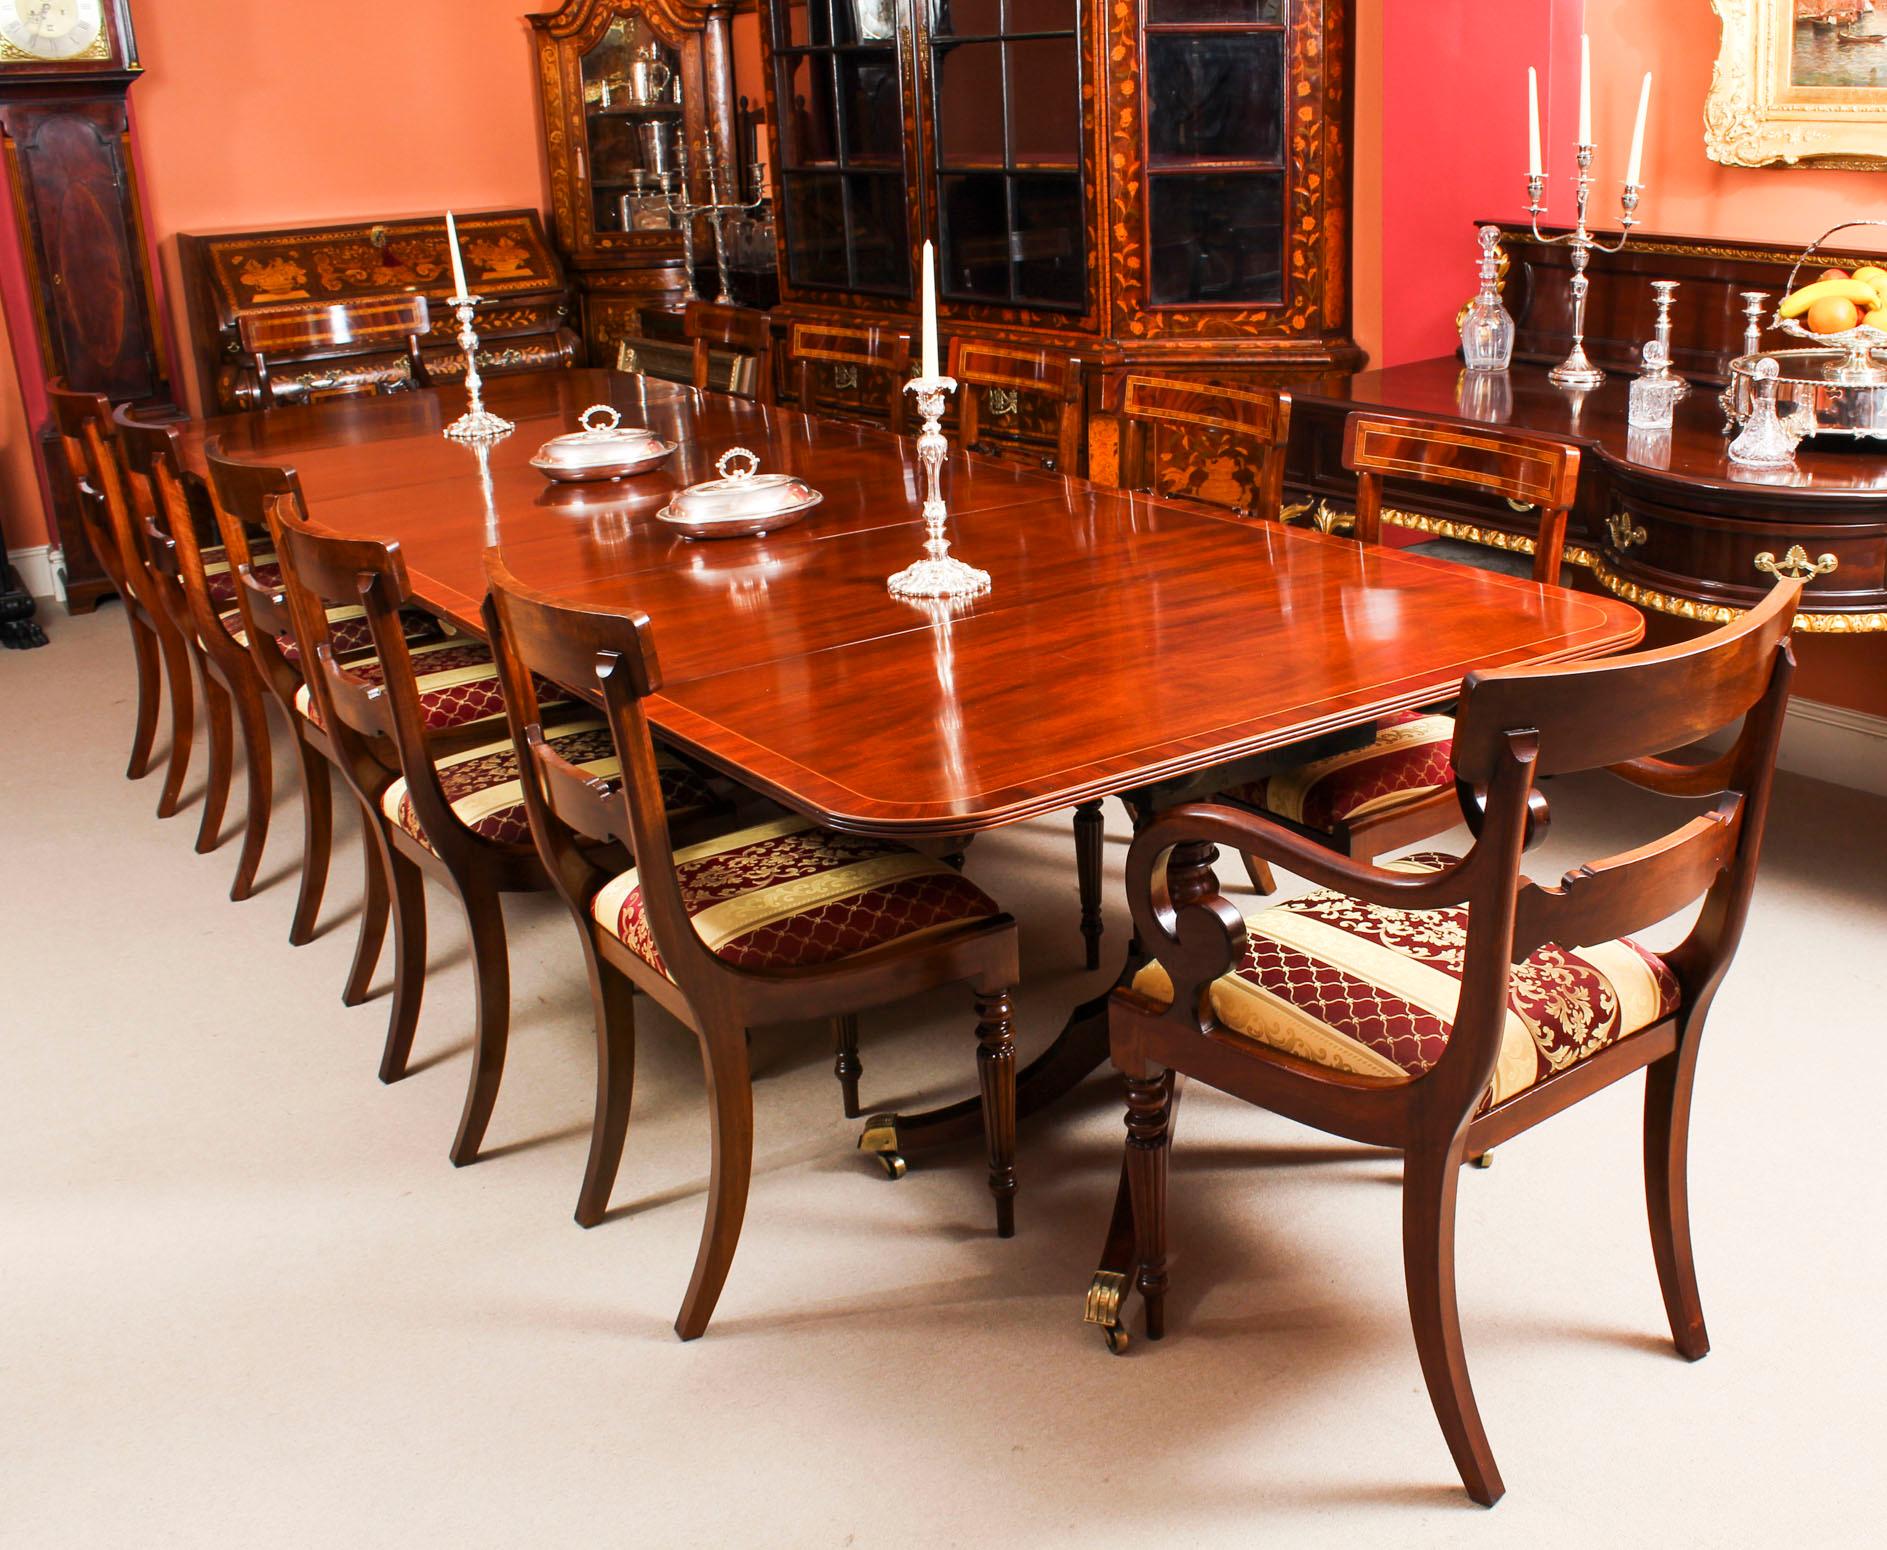 This is an elegant antique George III Regency dining table, dating from circa 1825.

The table is raised on three bases each with turned pillars, four hipped and swept square legs terminating in brass caps and castors. It has two leaves which can